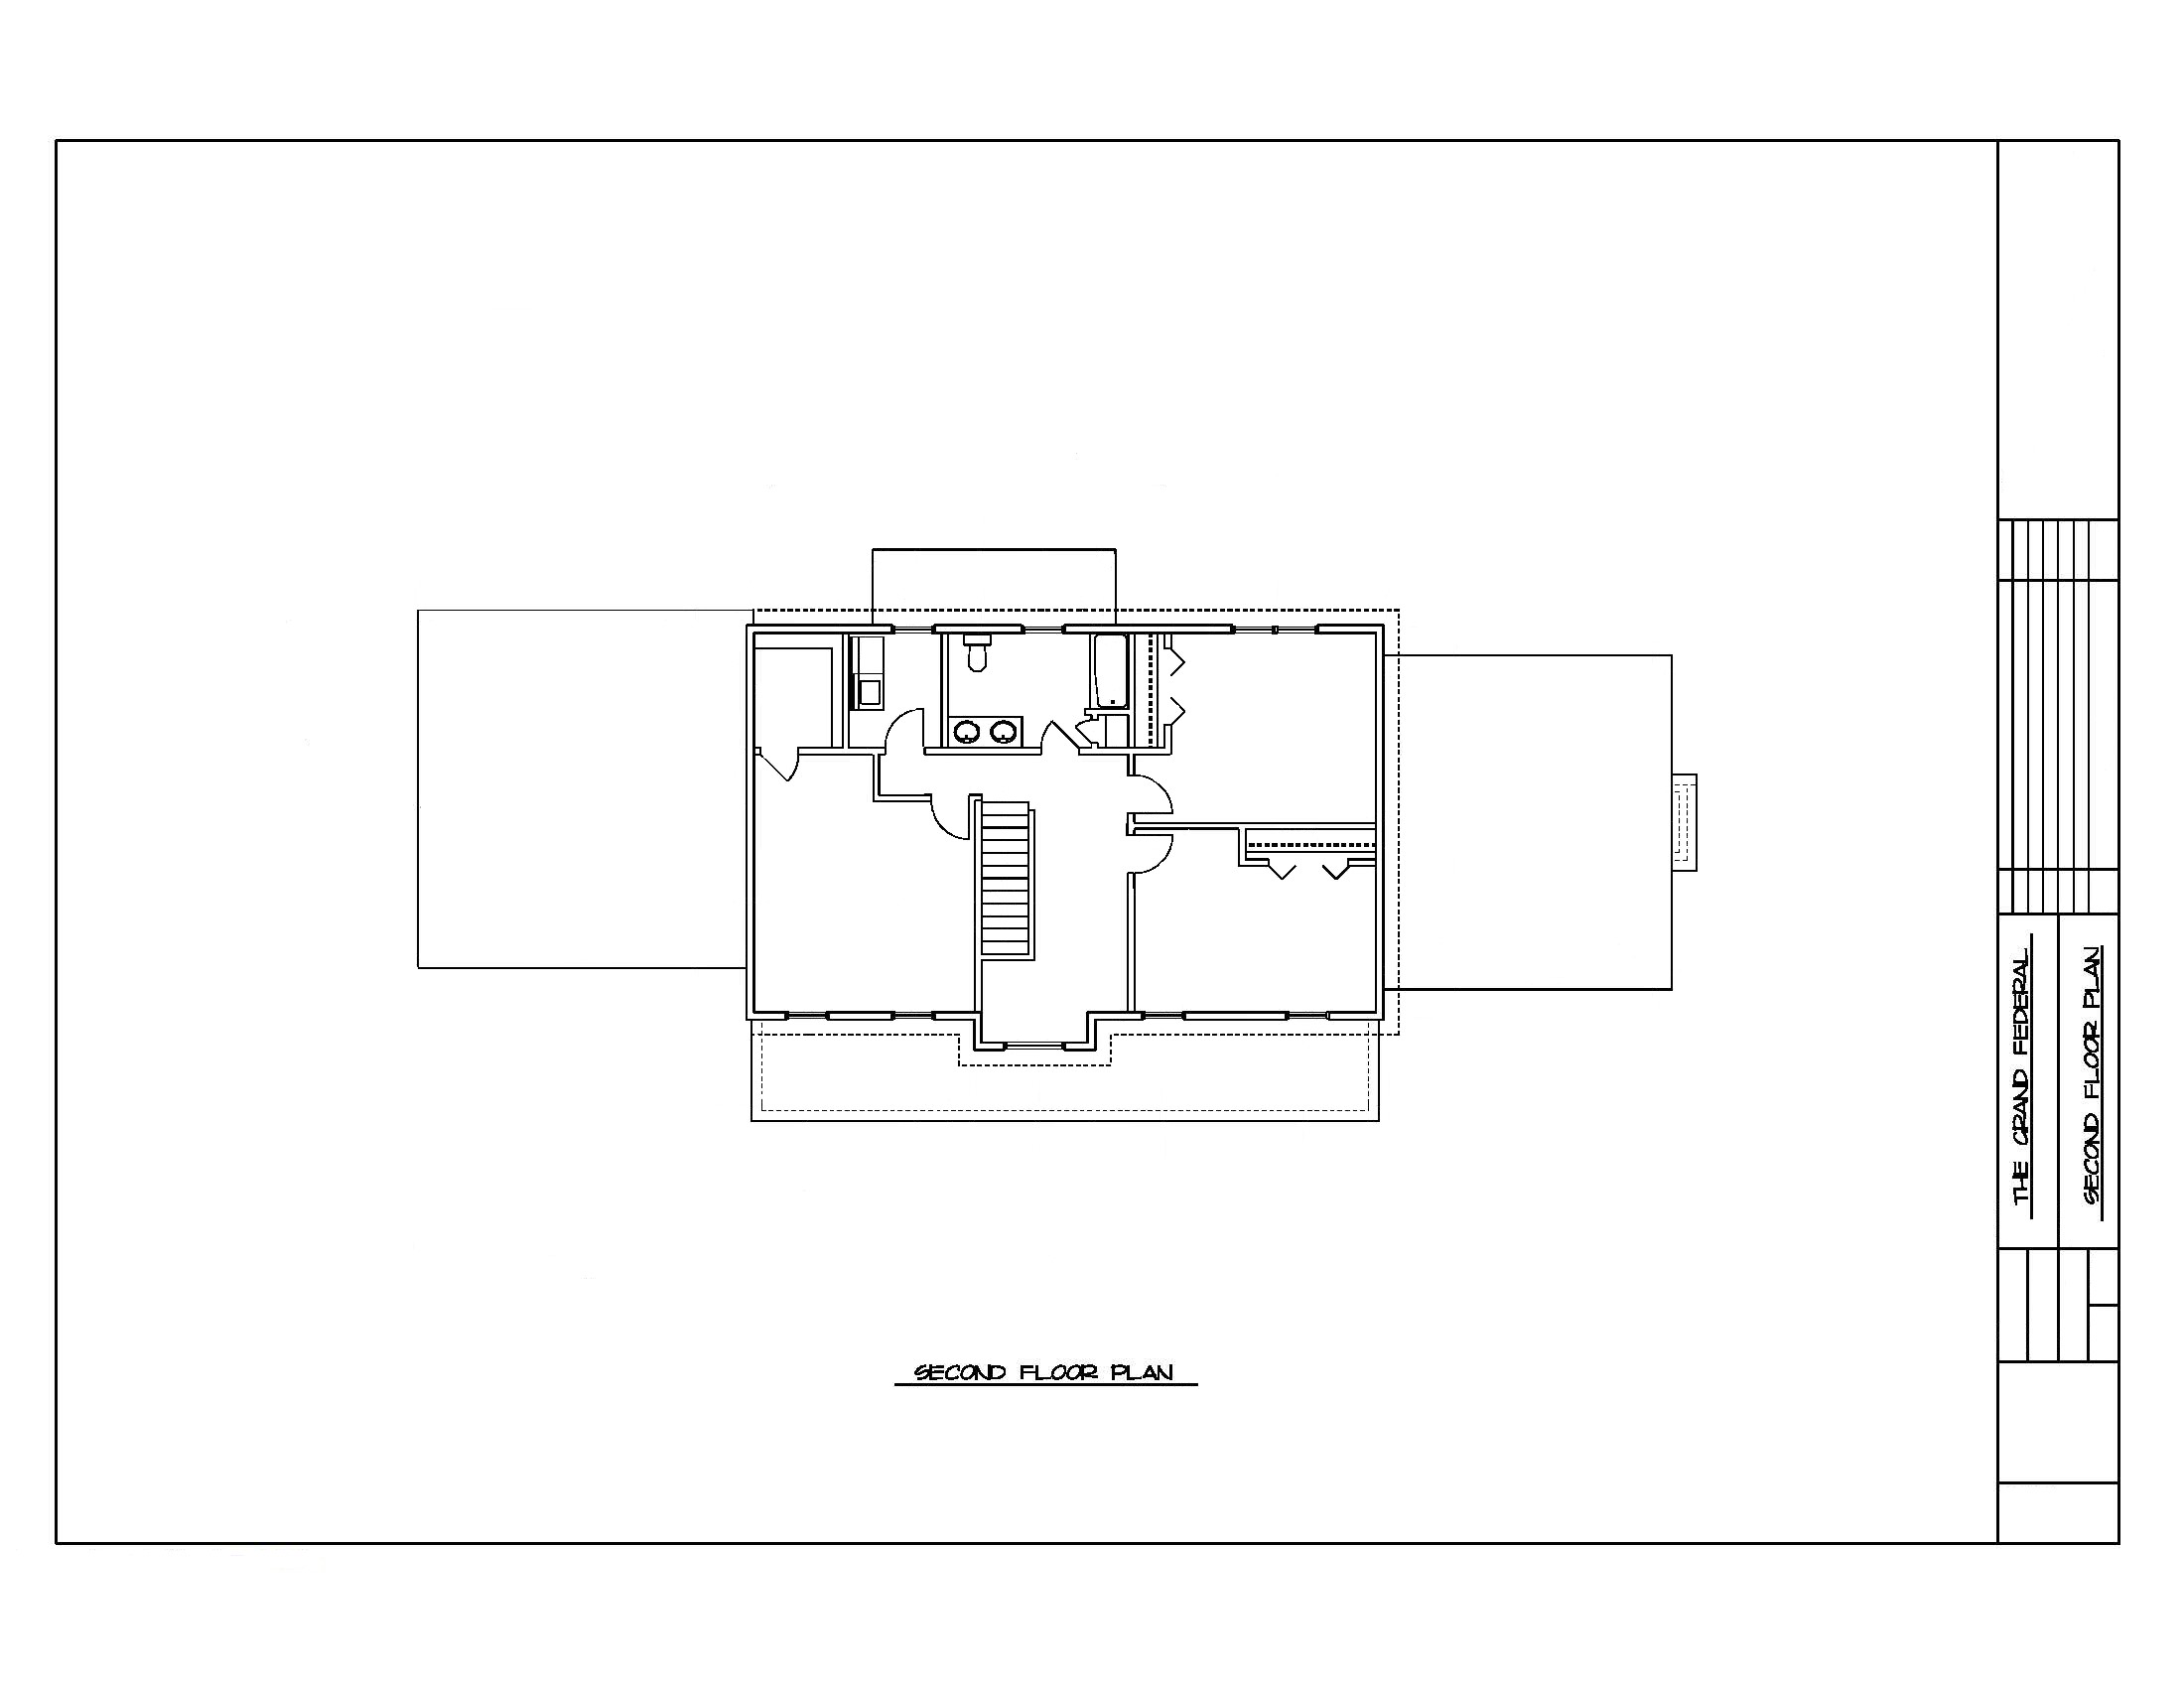 The Grand Federal I Second Floor Plan